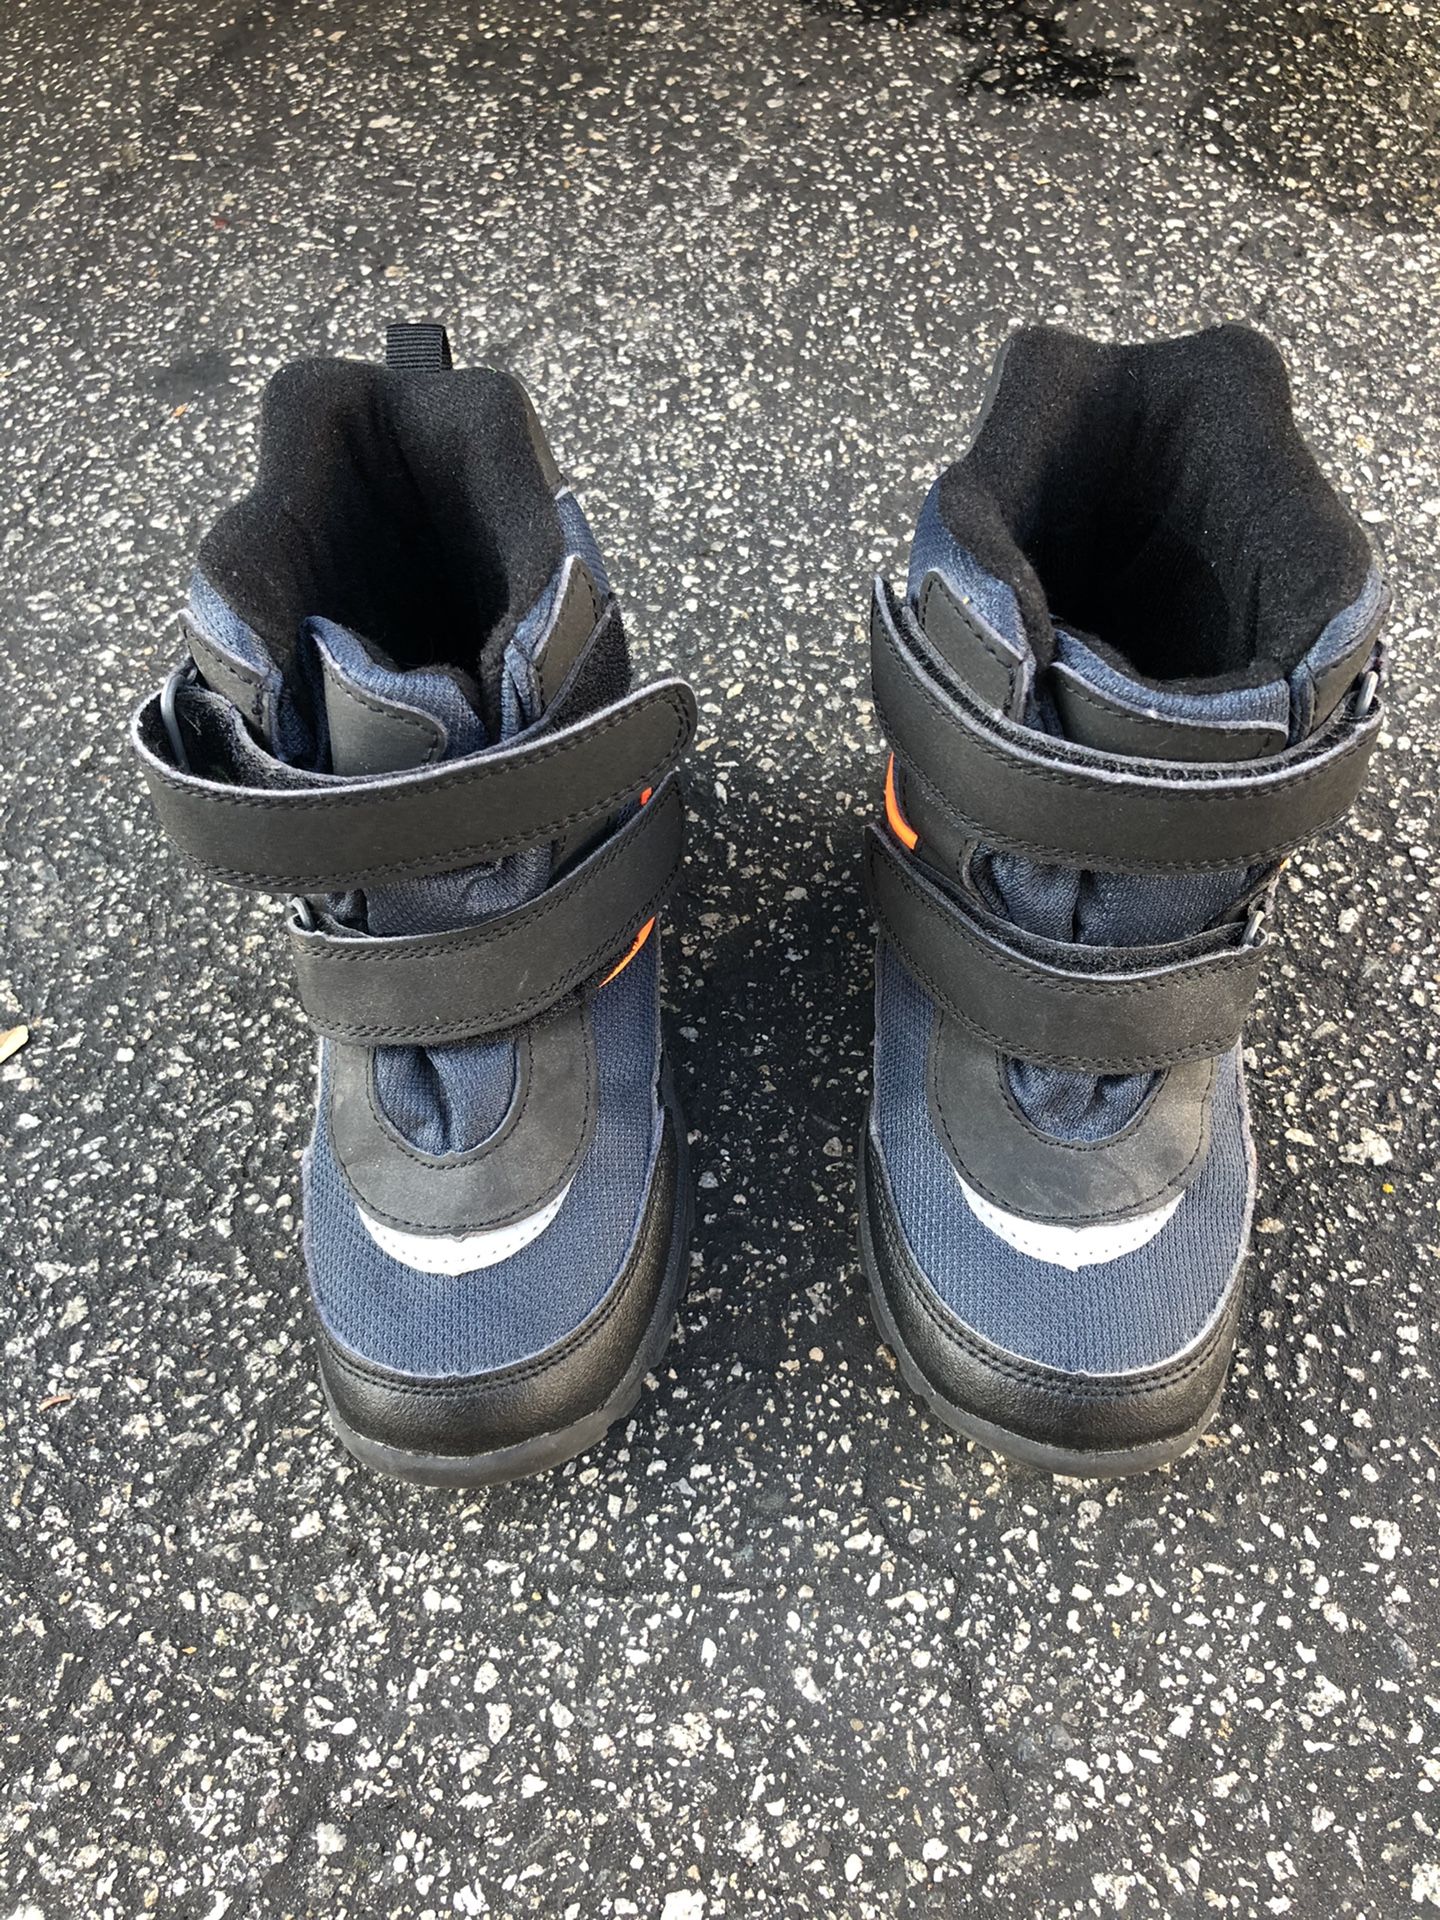 Rain boots for kids Size US 12